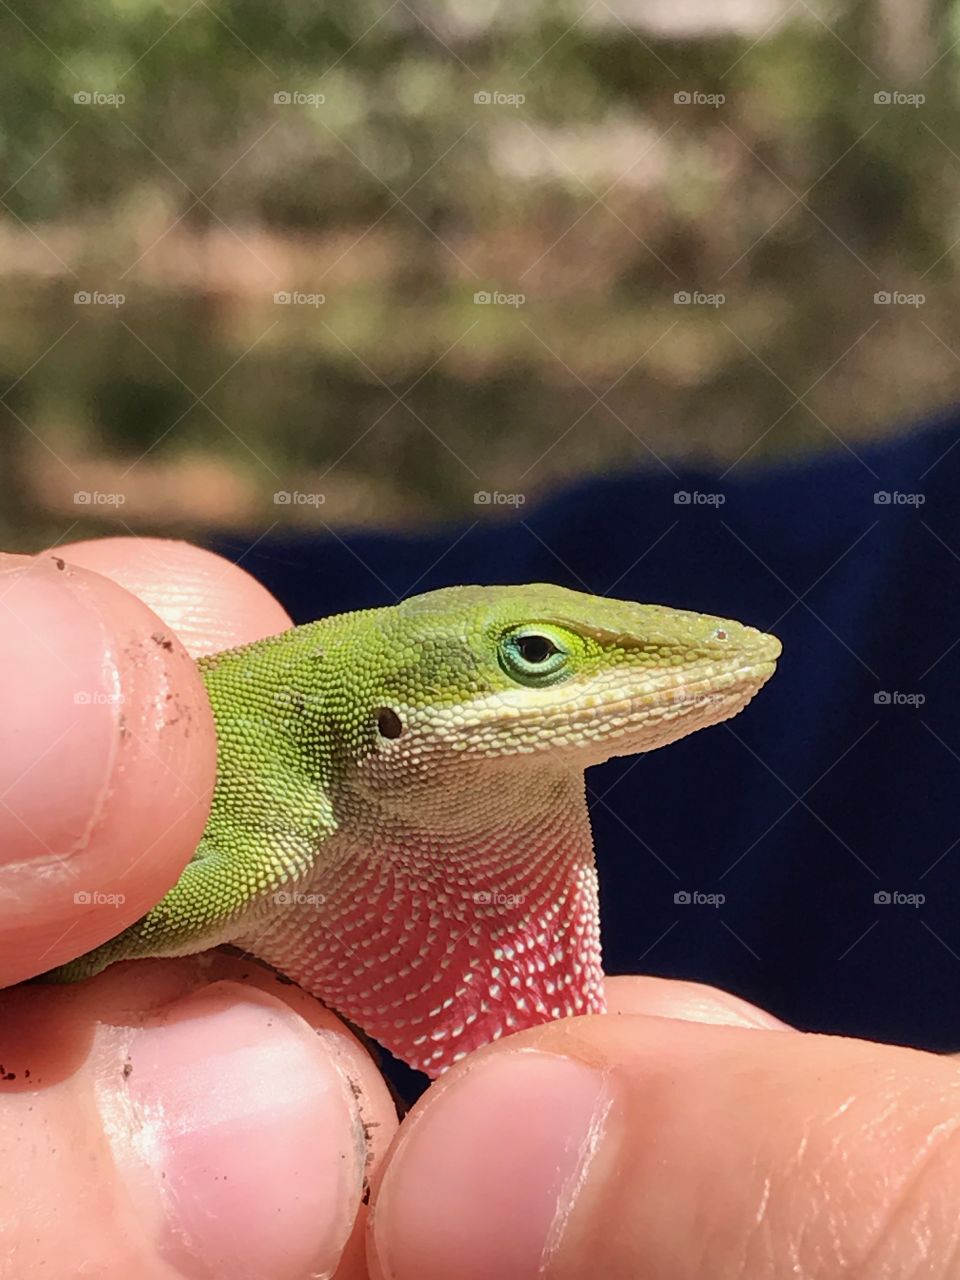 The dewlap of an anole.